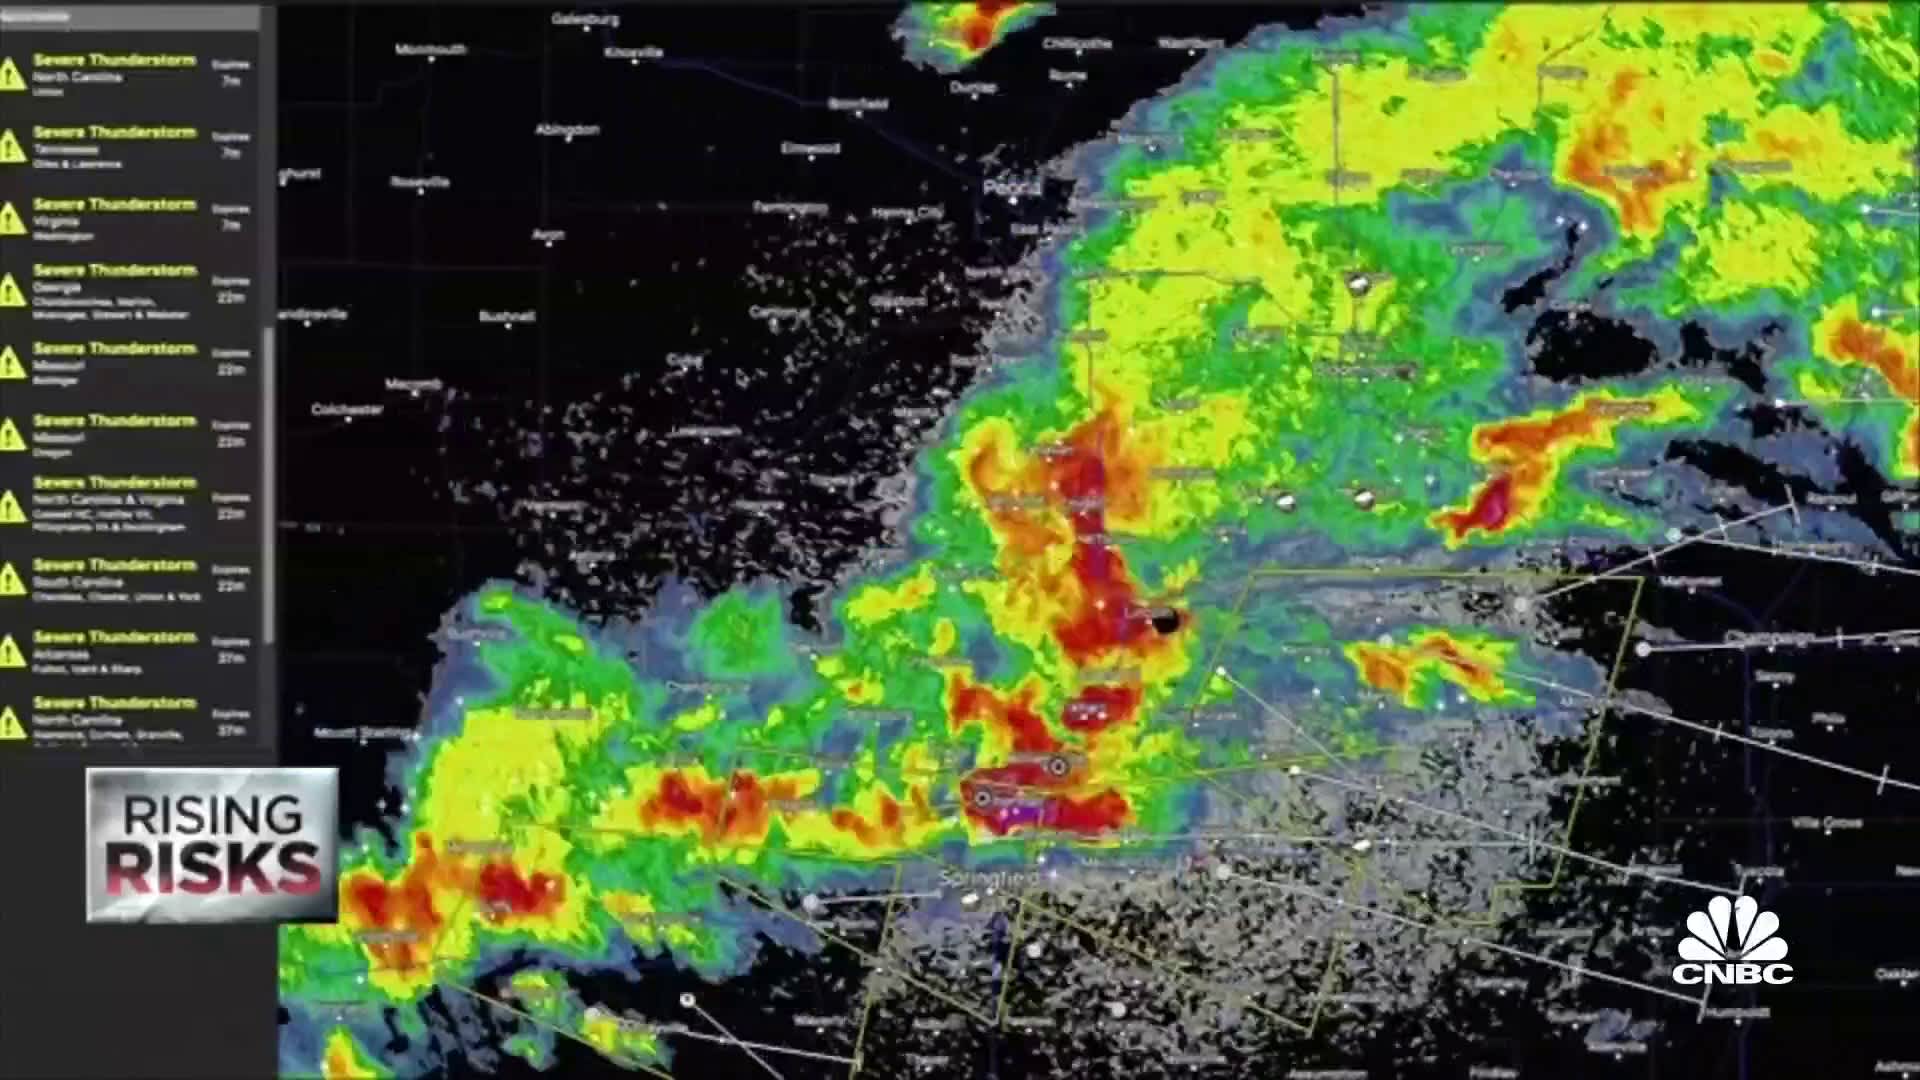 Delta, NFL, Air Force use Tomorrow.io to prepare for extreme weather